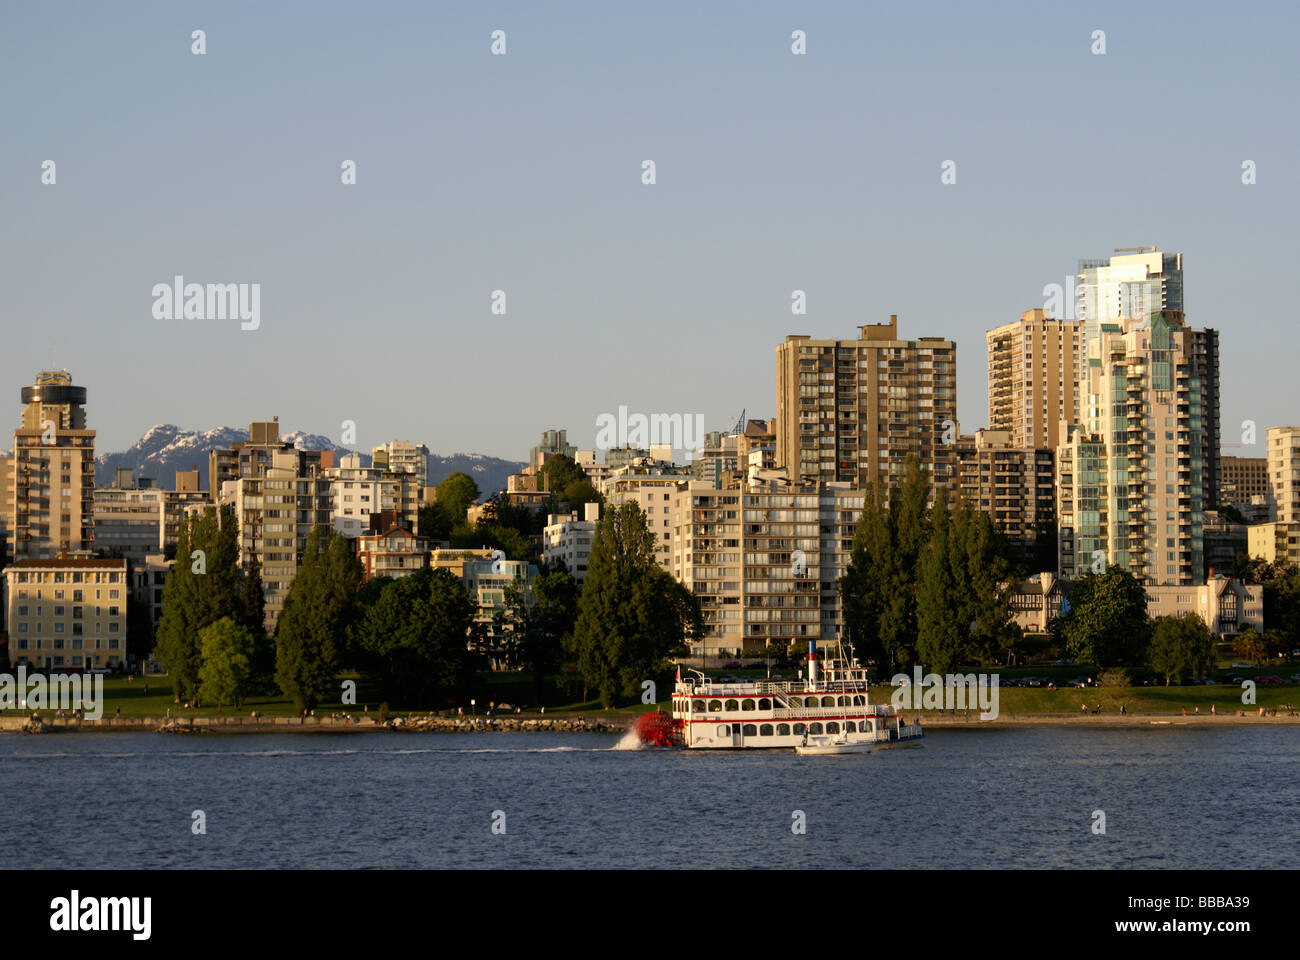 MPV Constitution paddlewheeler or sternwheeler sightseeing boat with West End skyline in back, English Bay, Vancouver, British Columbia, Canada Stock Photo